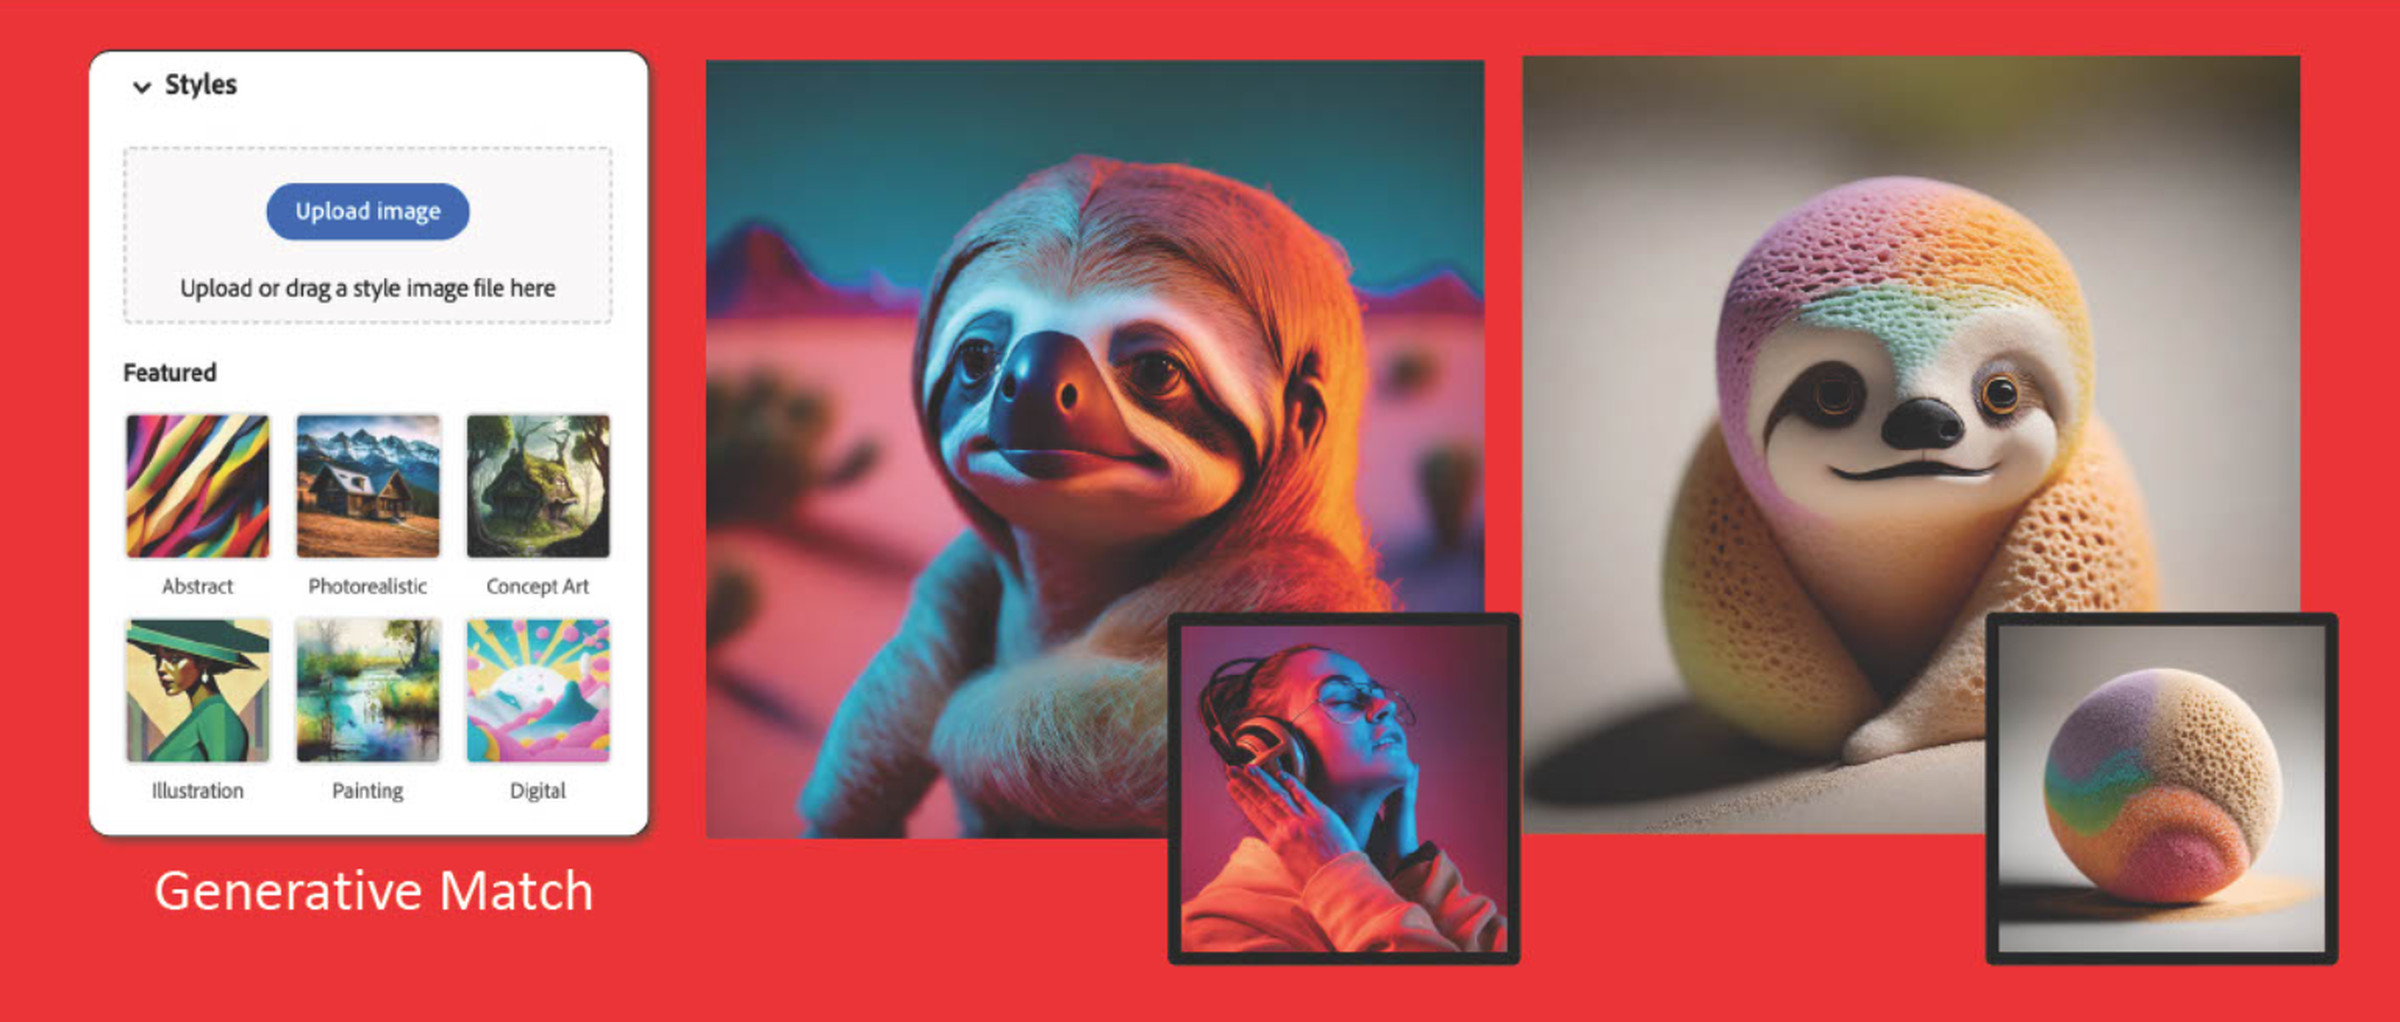 A screenshot of Adobe’s new Generative Match feature with two sloths.